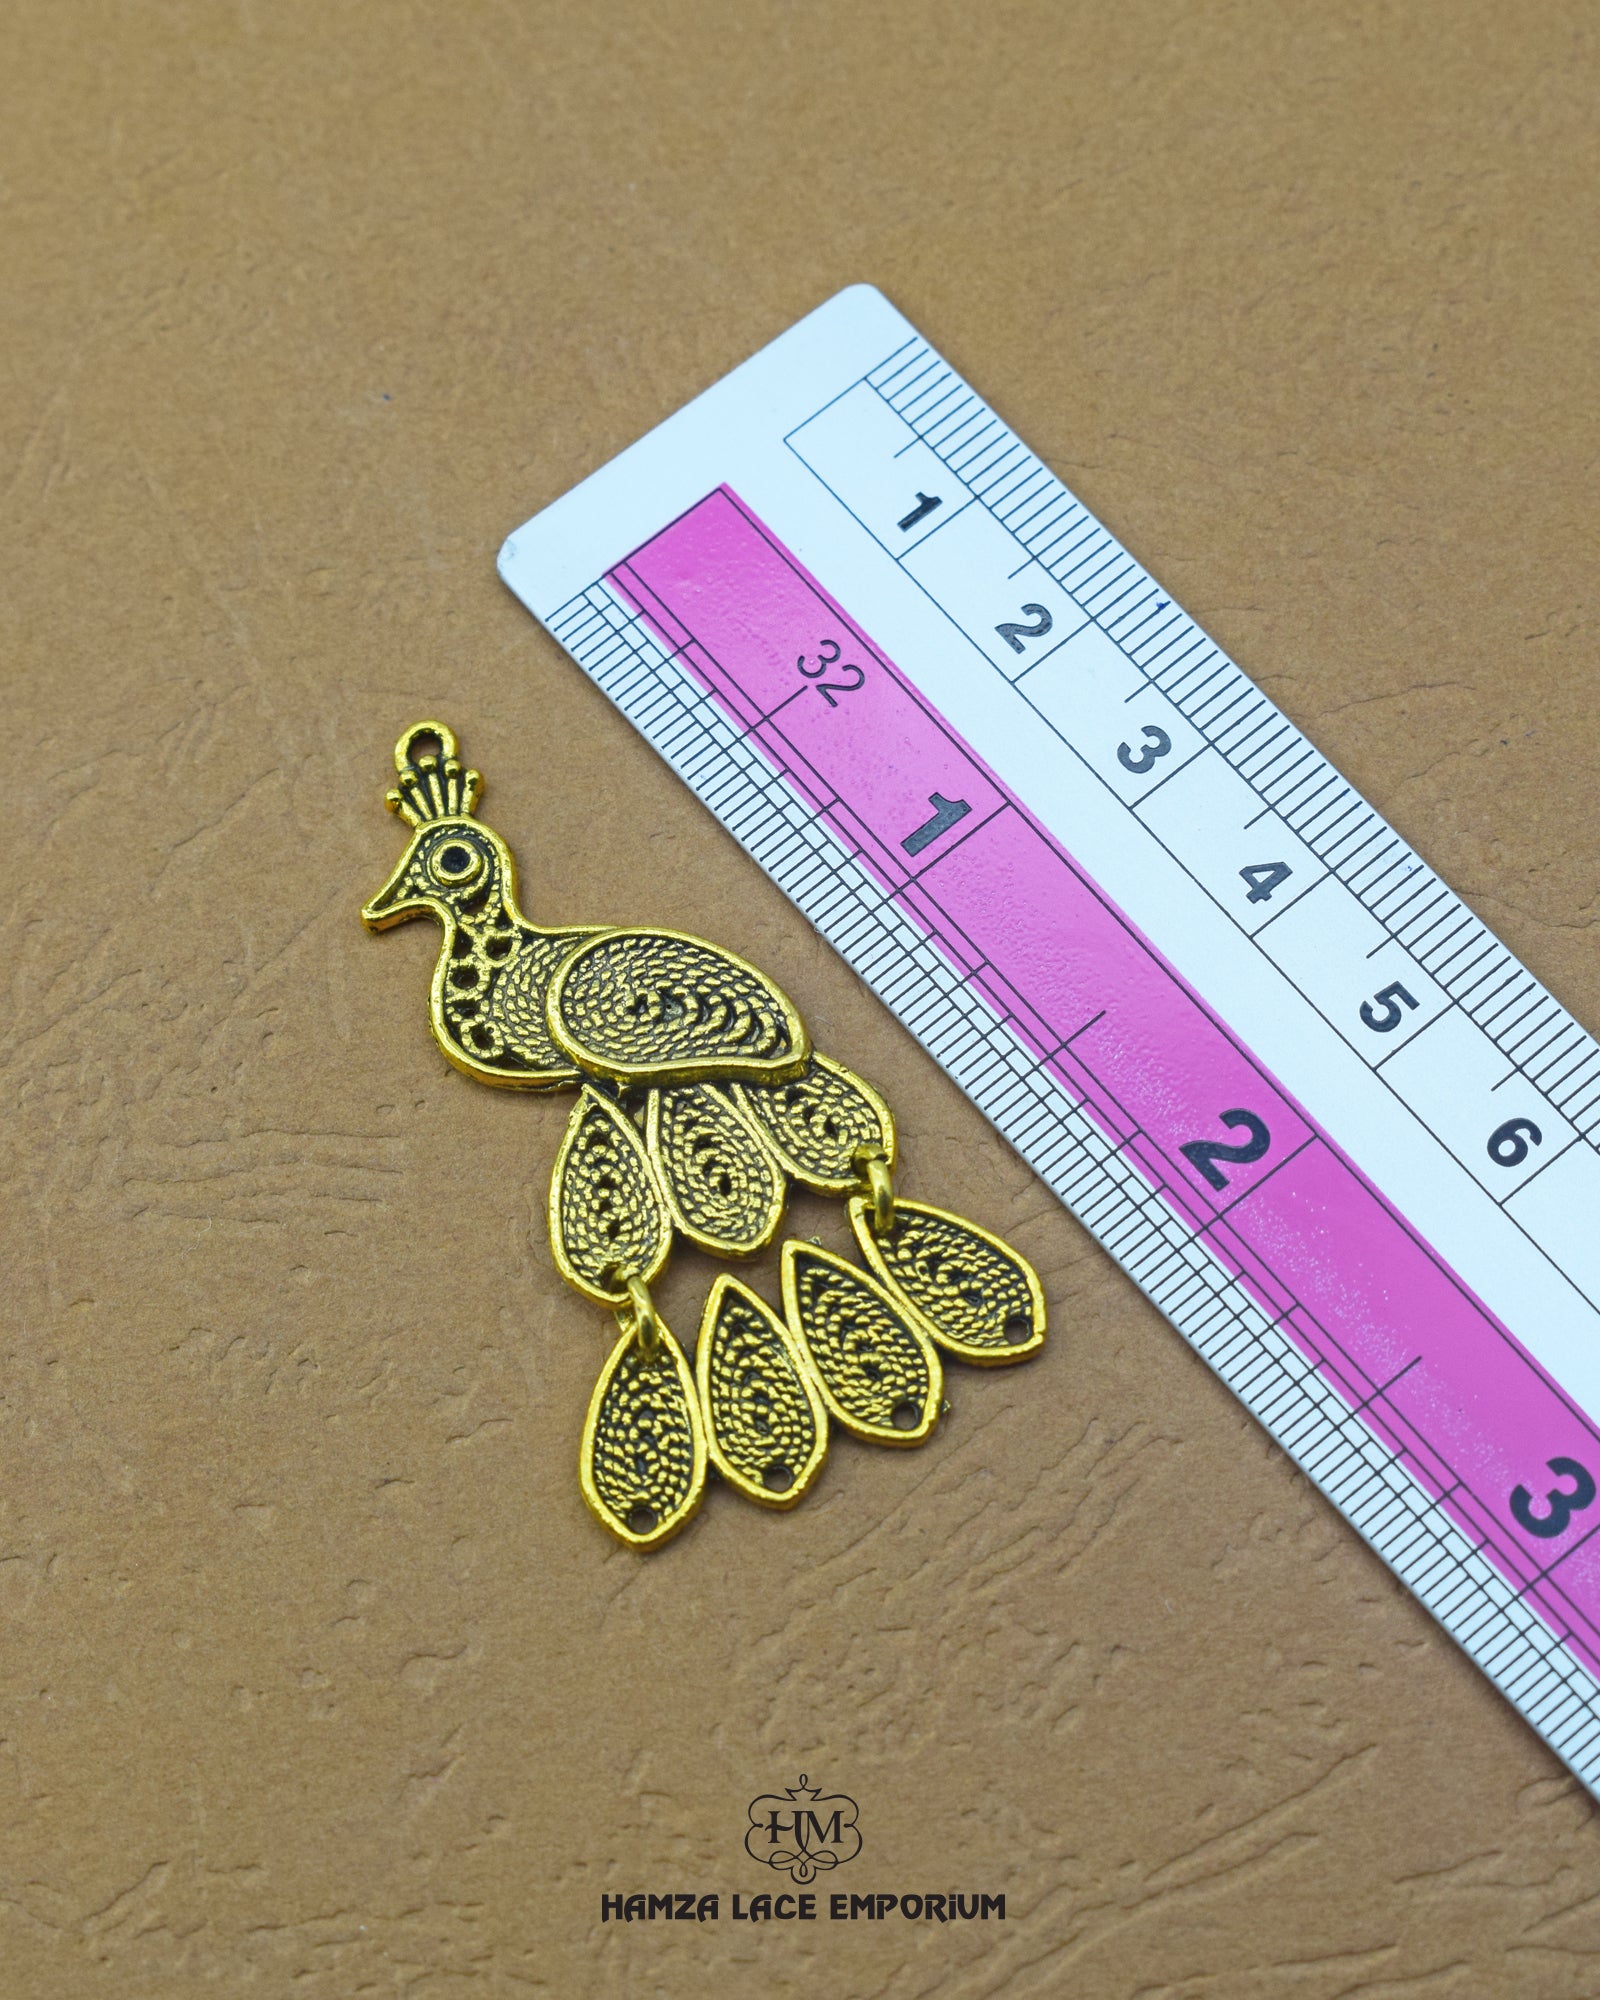 The size of the 'Peacock Design Button MA539' is indicated using a ruler.